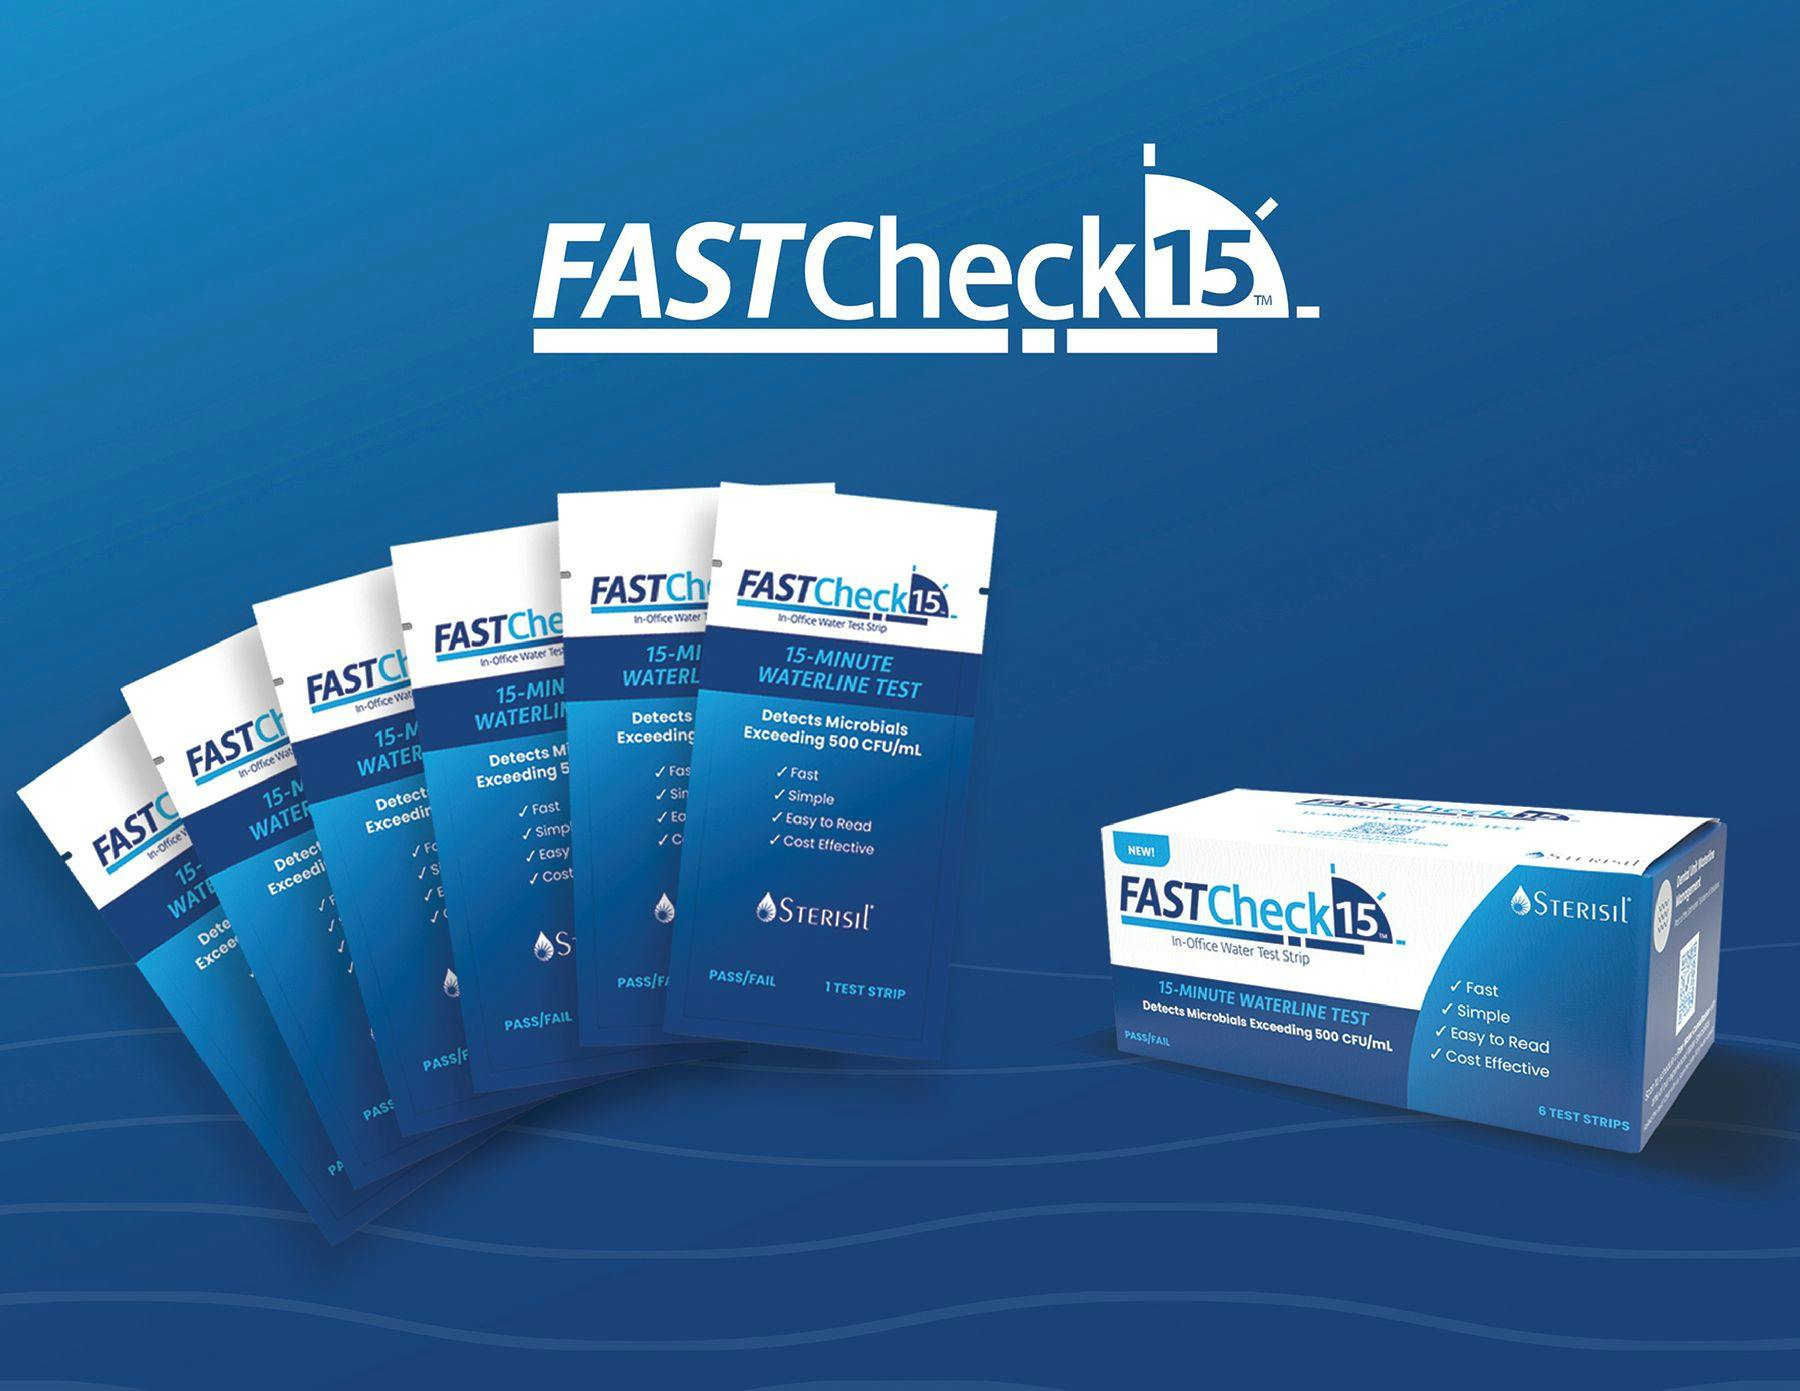 New FASTCheck15 In-Office Waterline Test Delivers Rapid, Reliable Verification of Dental Waterline Safety | Image Credit: © Sterisil